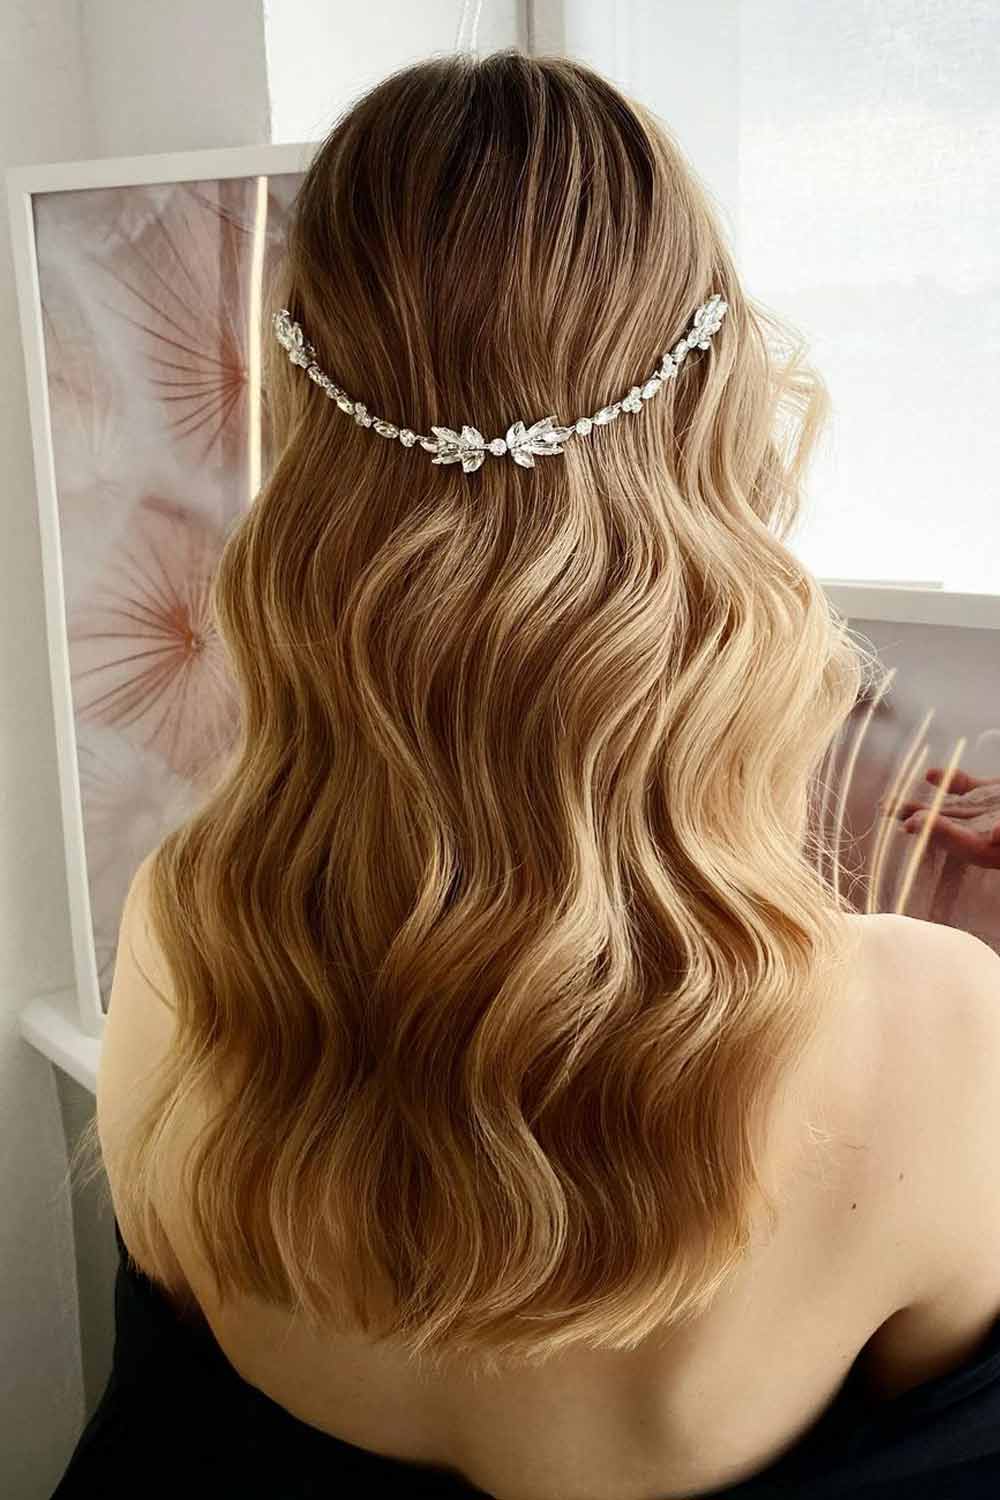 Wavy Hairstyle with Accessory